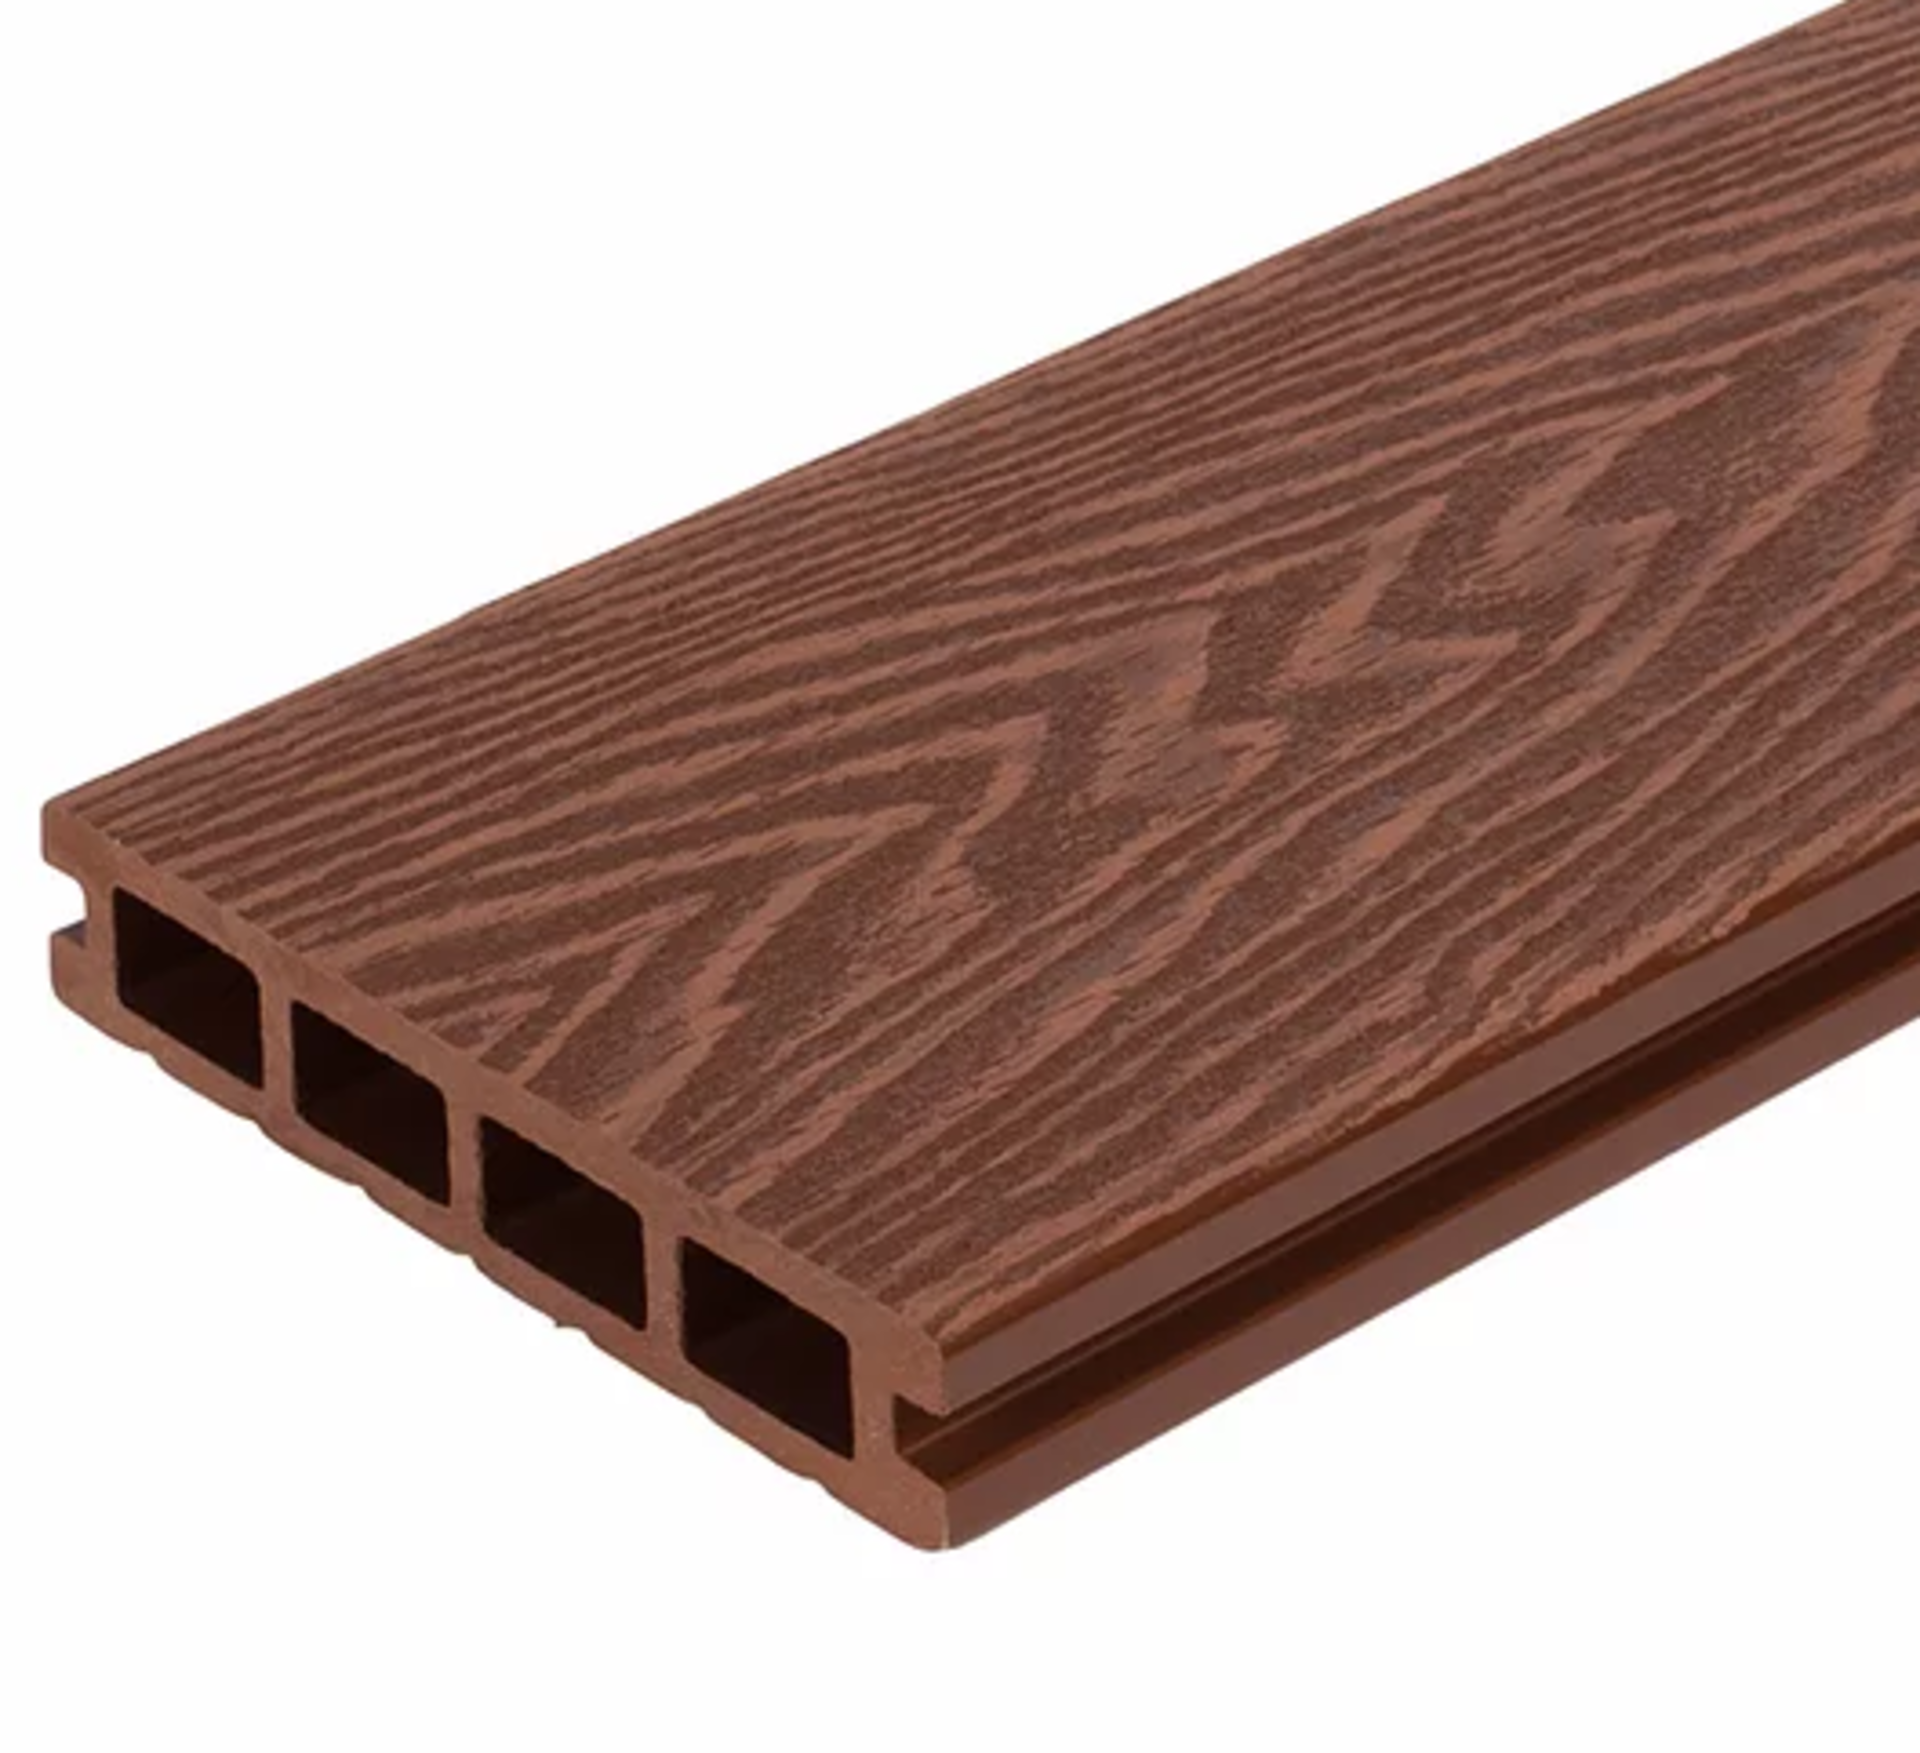 * 20 WPC Composite Coffee Double sided Embossed Woodgrain Decking Boards 2900mm x 146mm x 25mm - Image 3 of 4